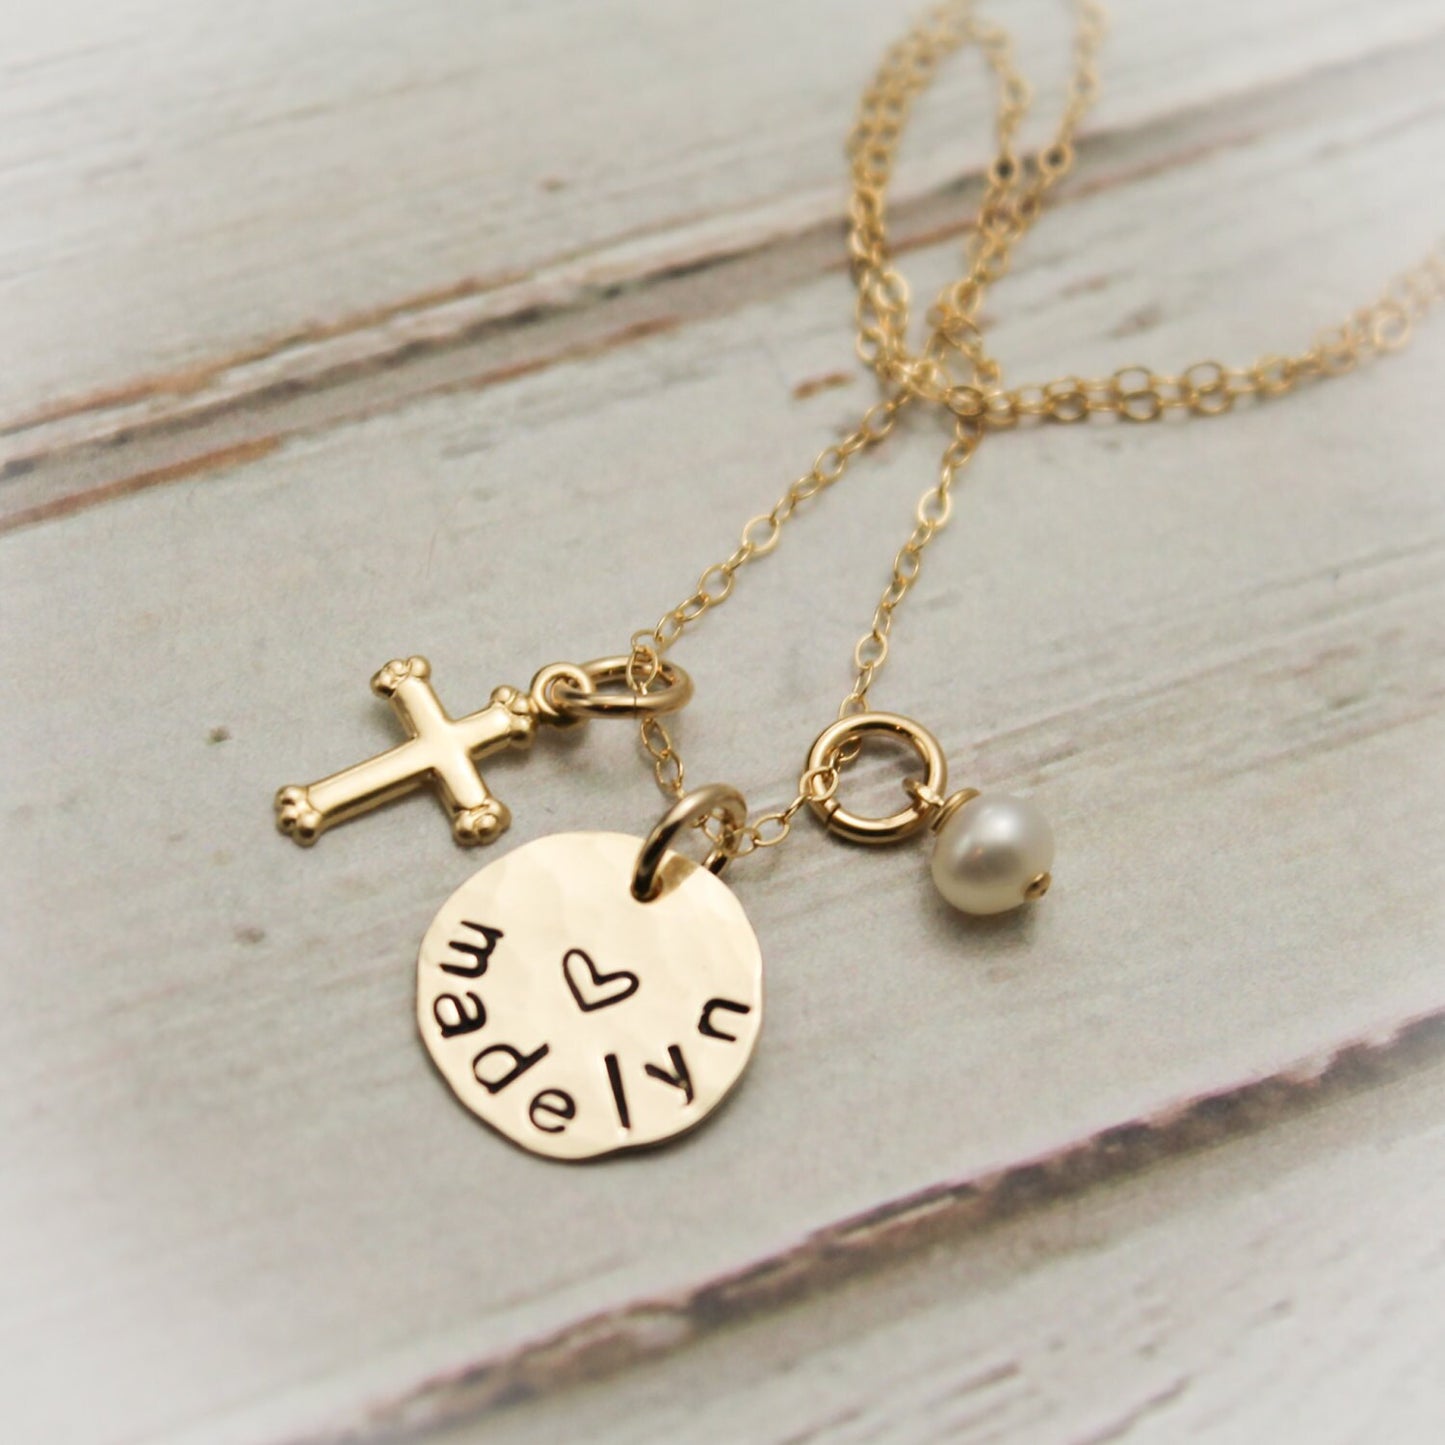 Personalized Disc and Cross Necklace 14K Gold Filled Hand Stamped Jewelry